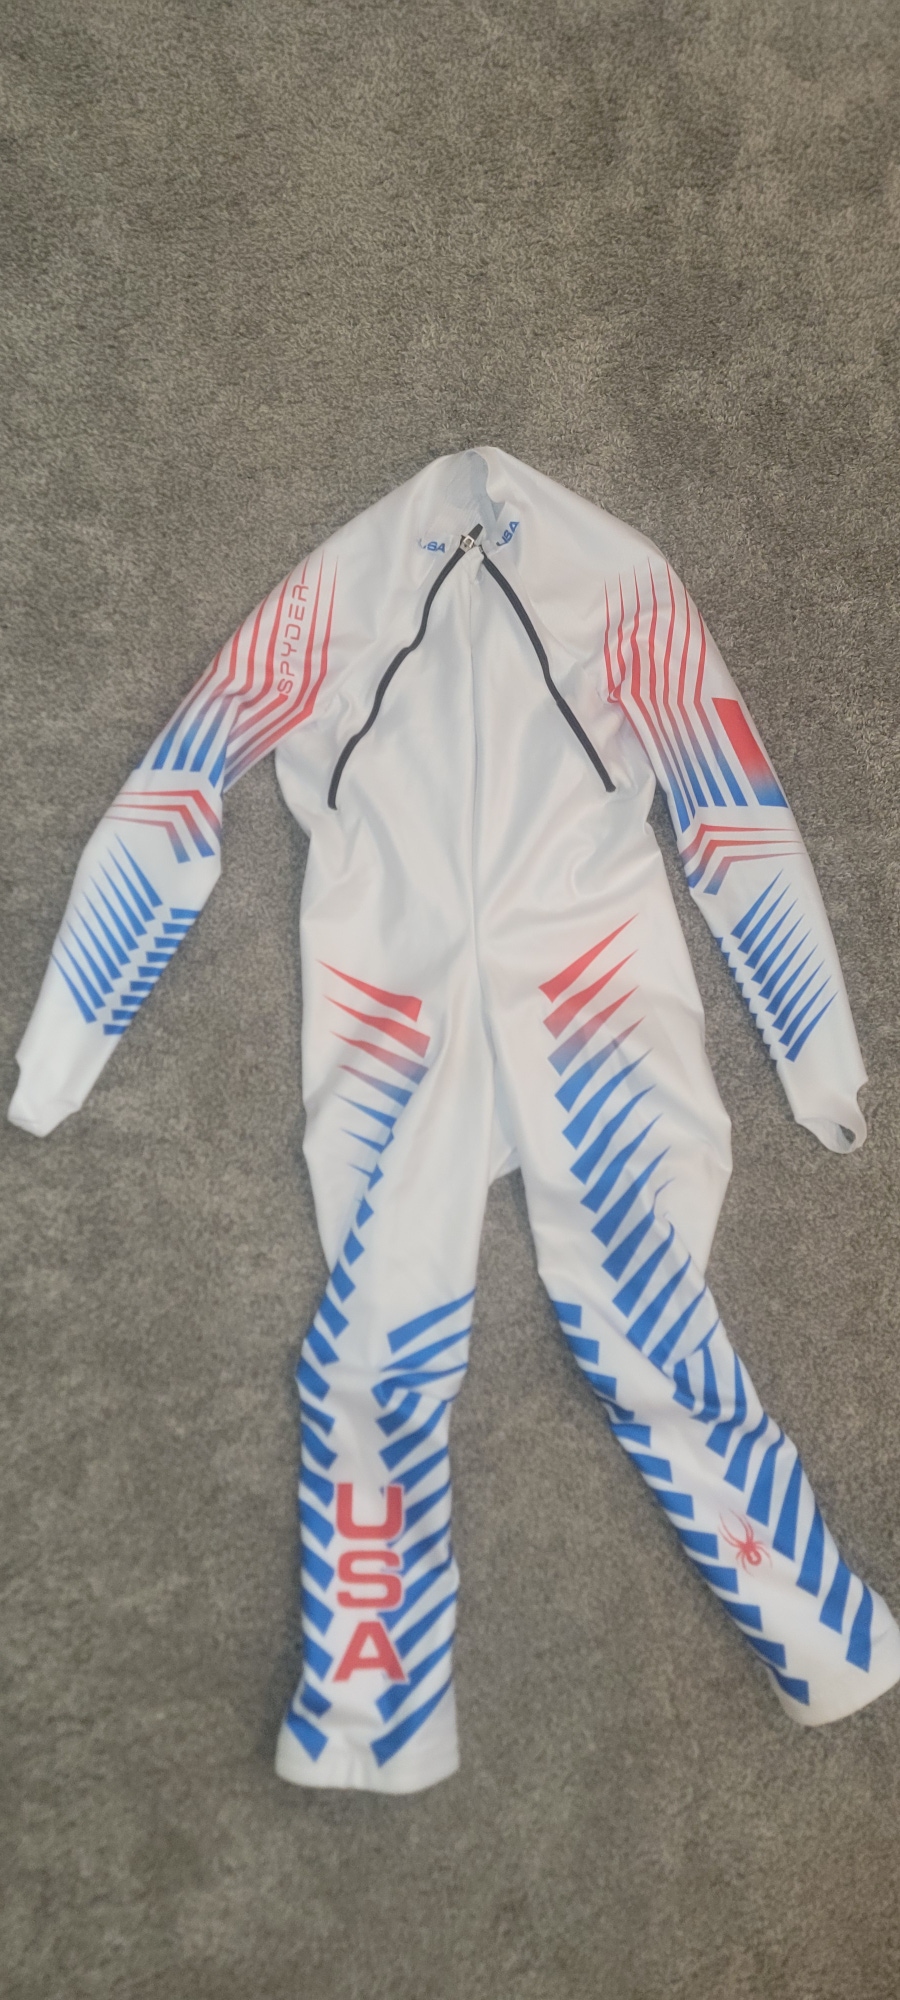 2018 Olympic Team USA Spyder DH Suit